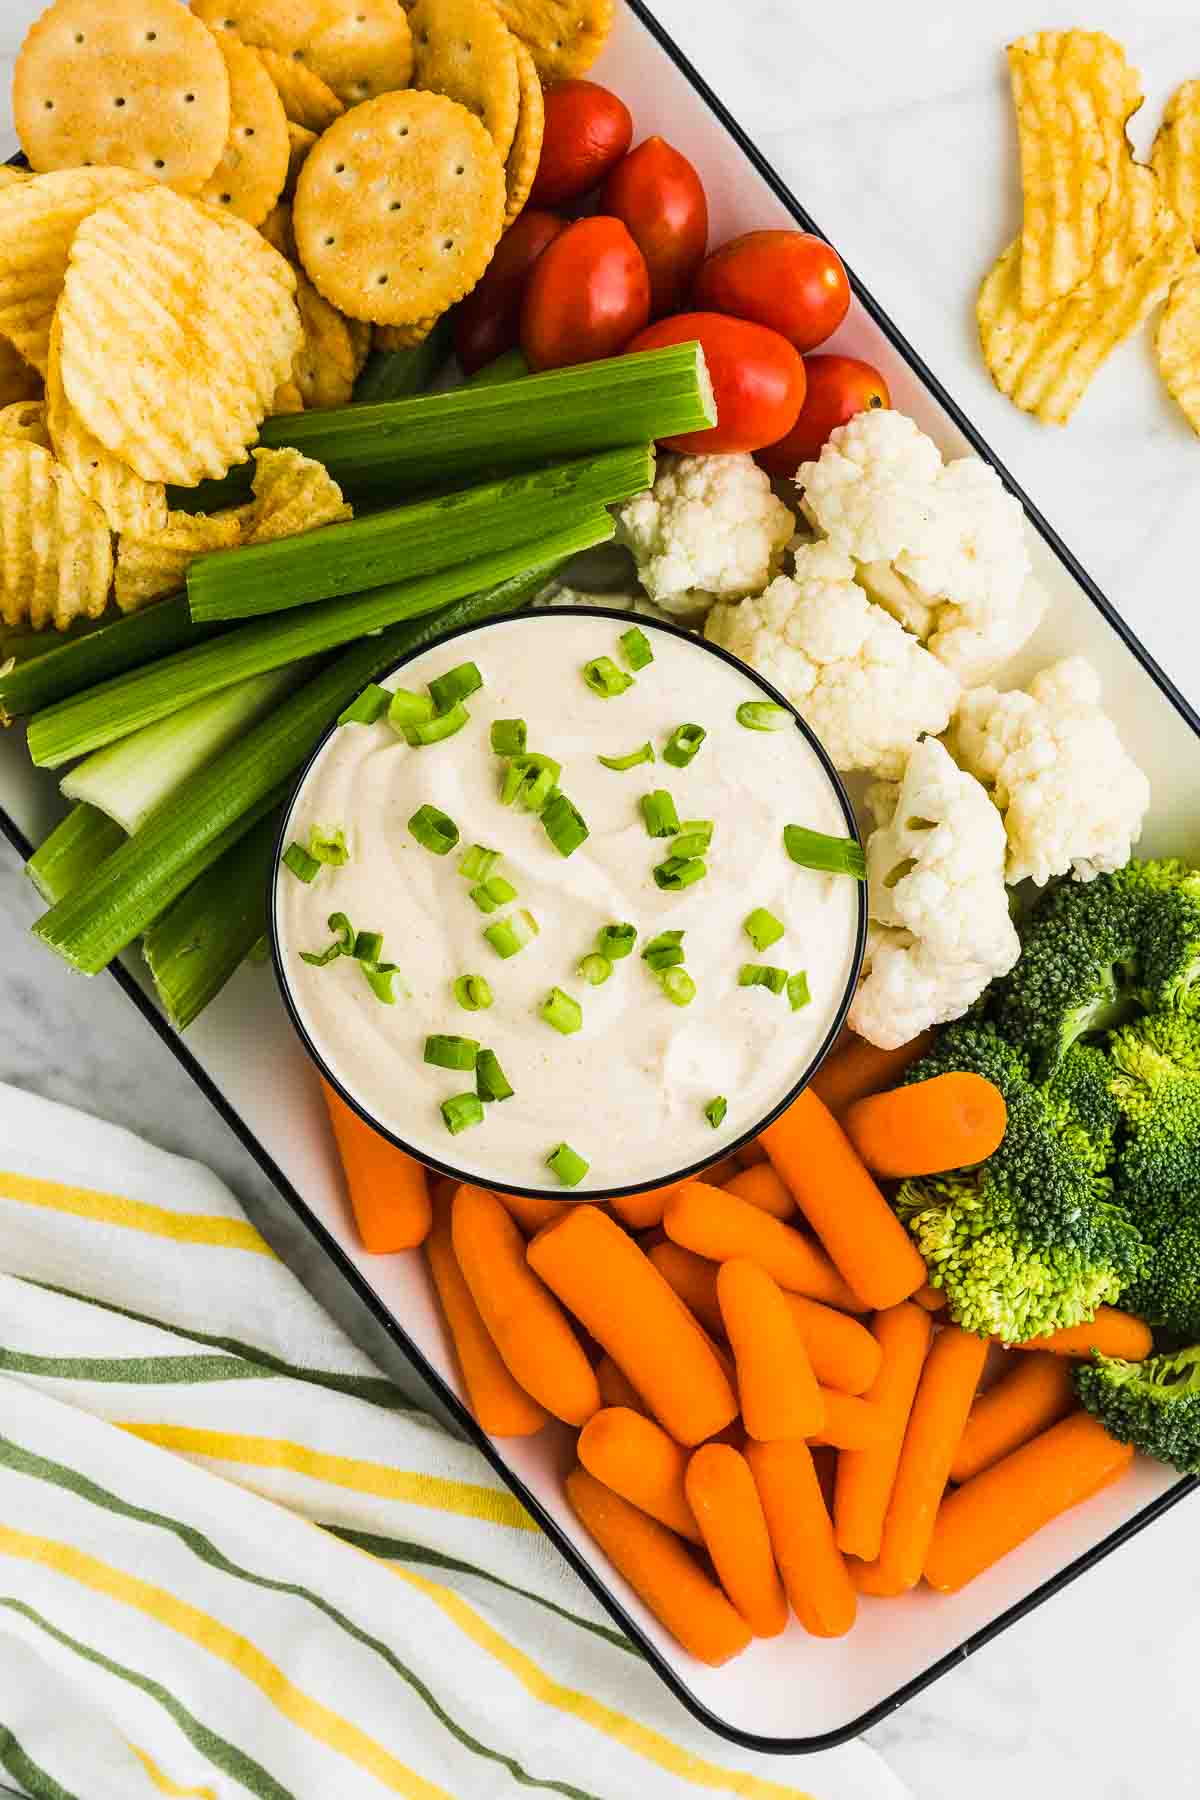 A bowl of Curry Dip on a plate of veggies, crackers, and chips.